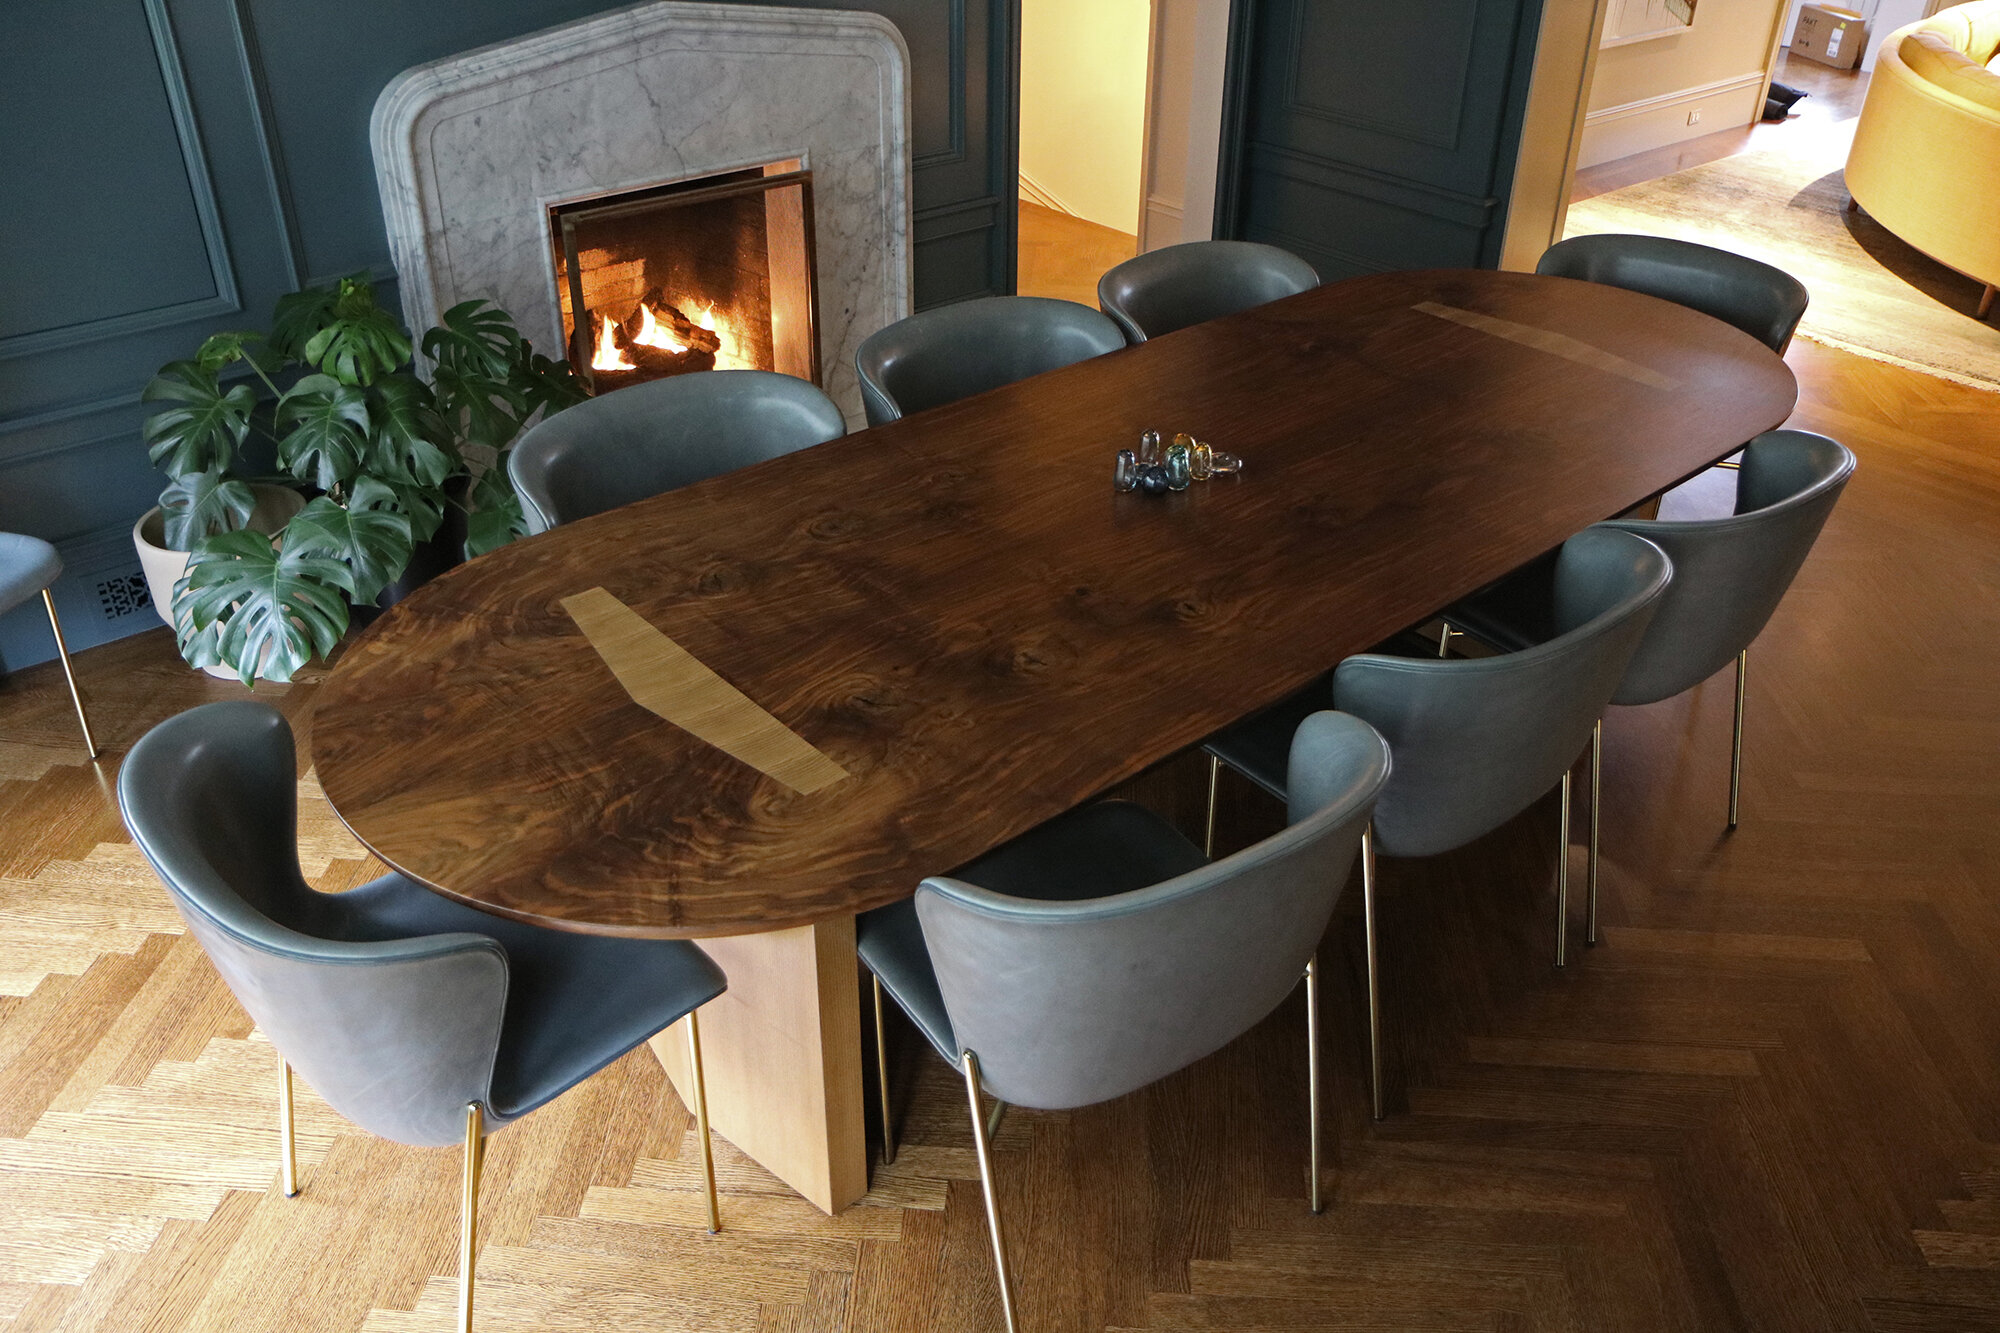 02 Finley Dining Table From Above.jpg